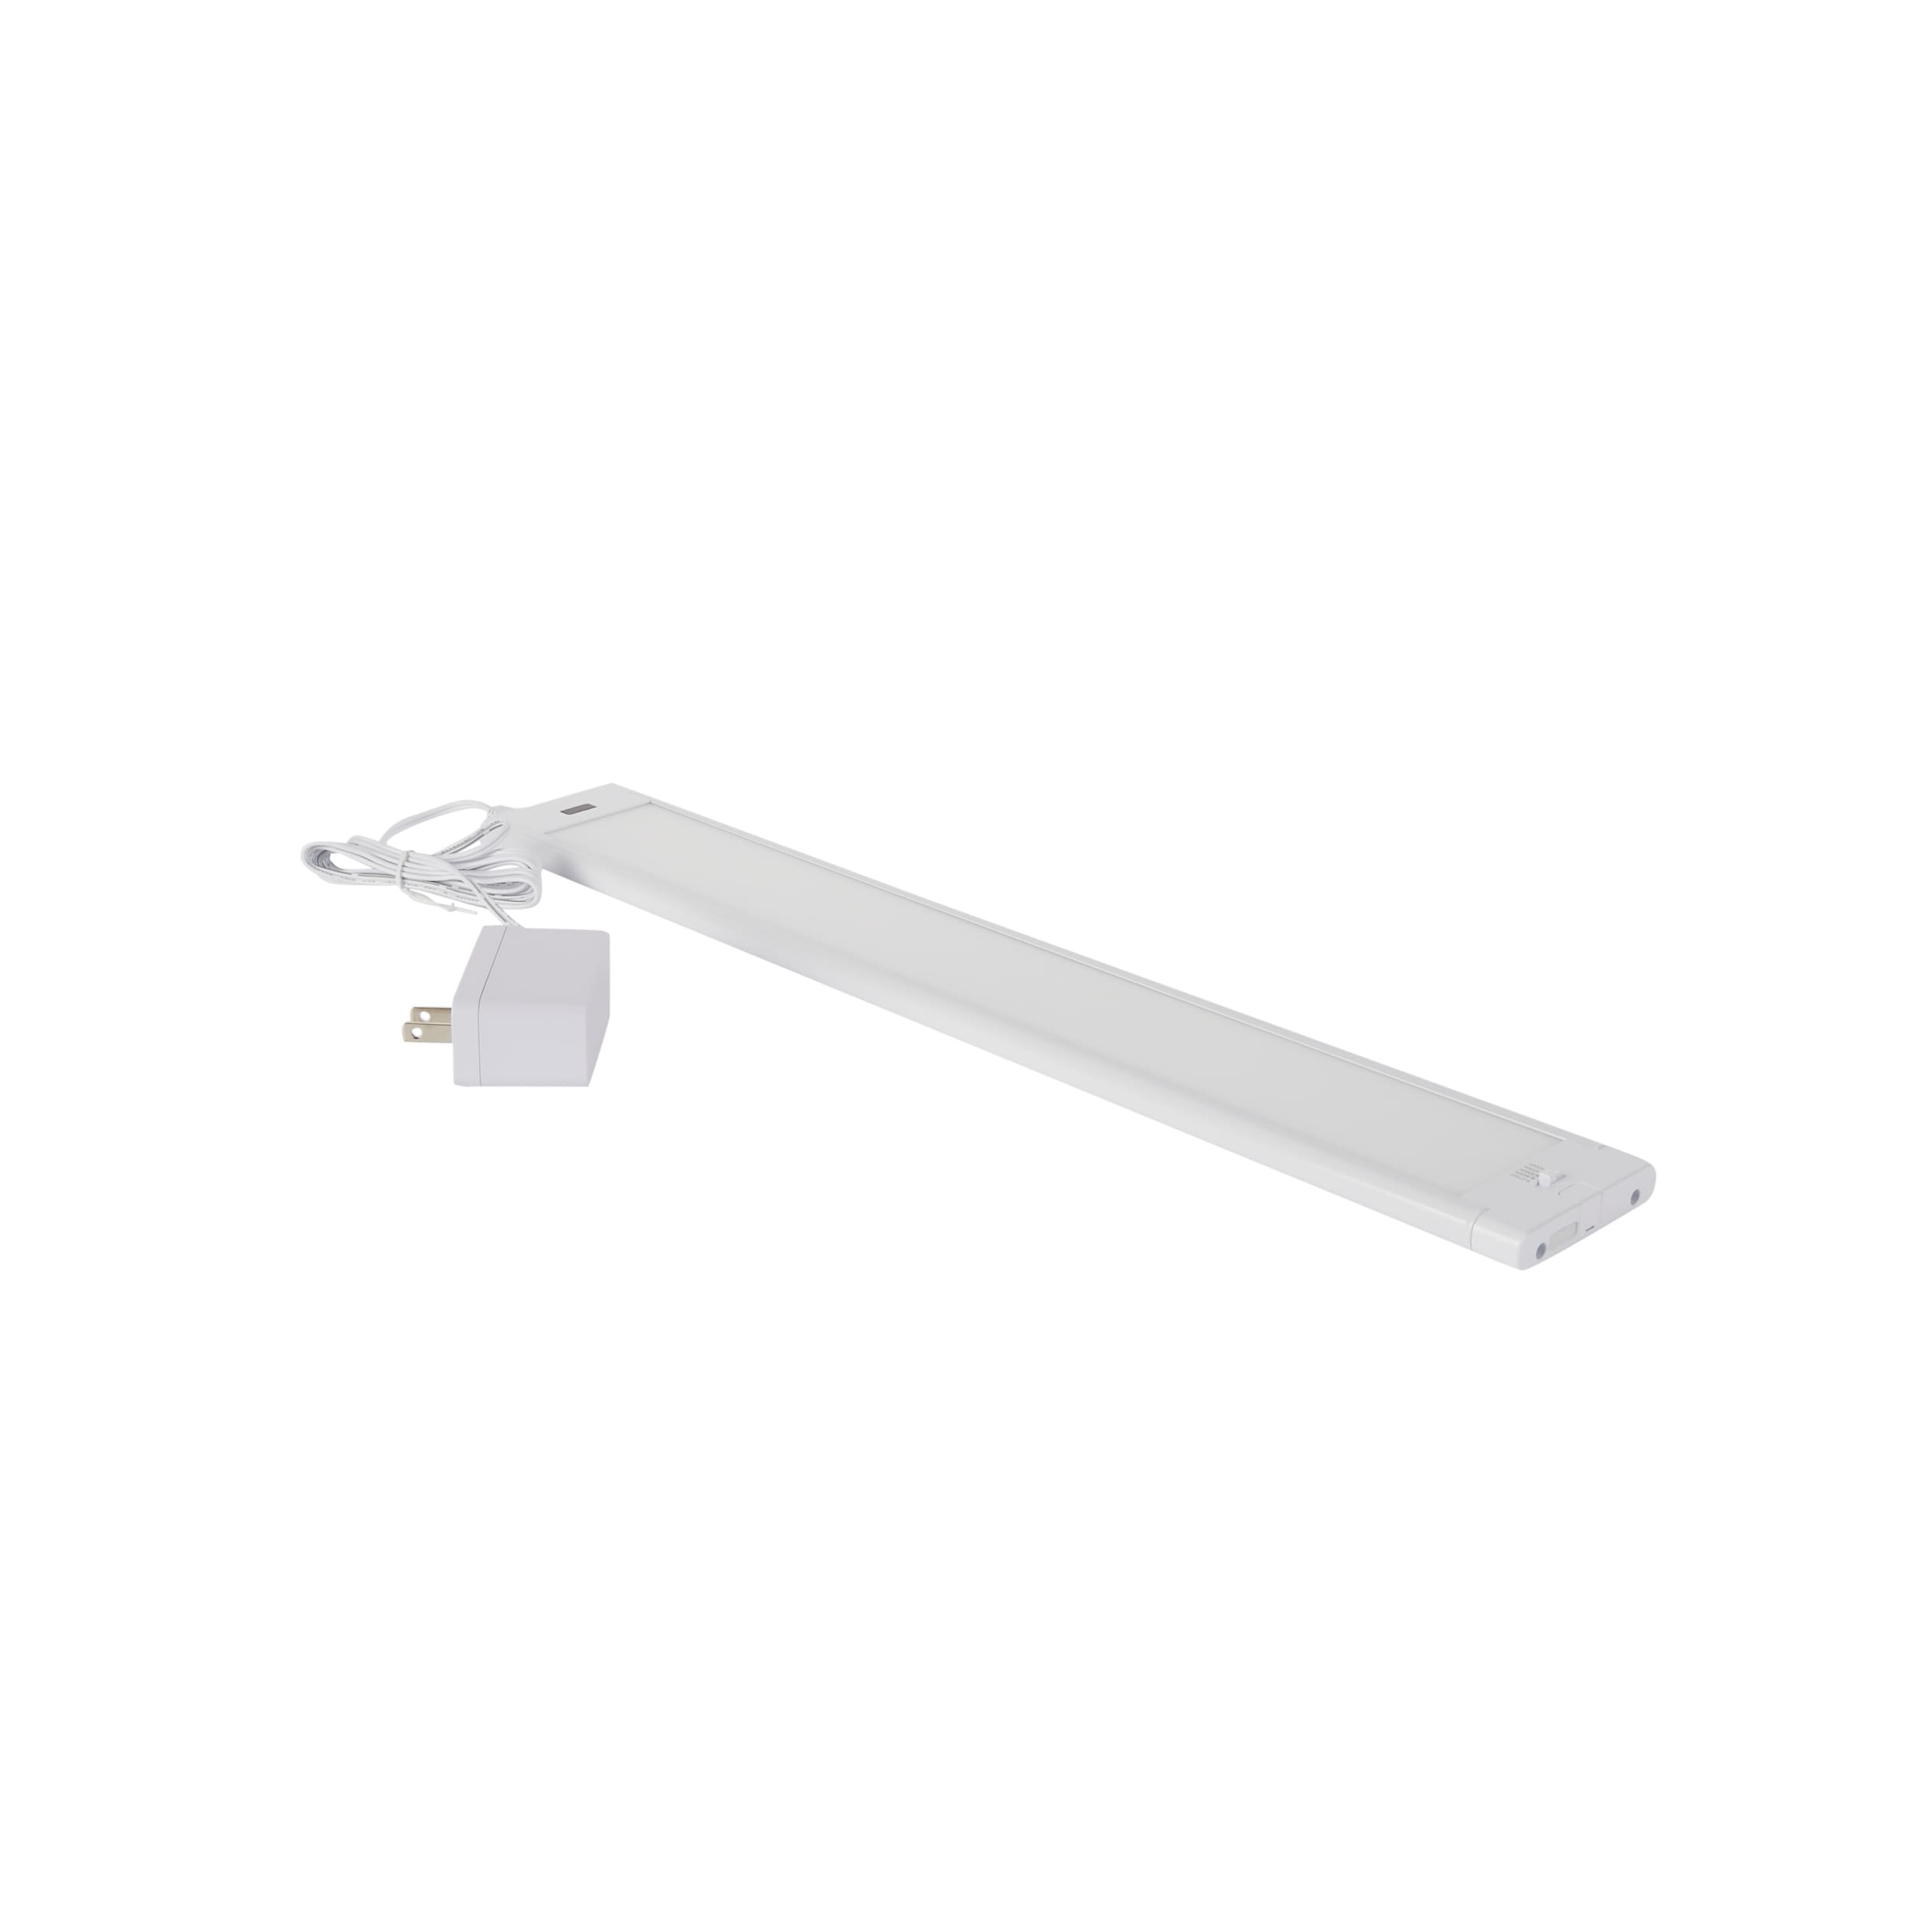 Linkable 27" White Undercabinet Lighting with 4 35W Halogen Brite Light Bulbs 